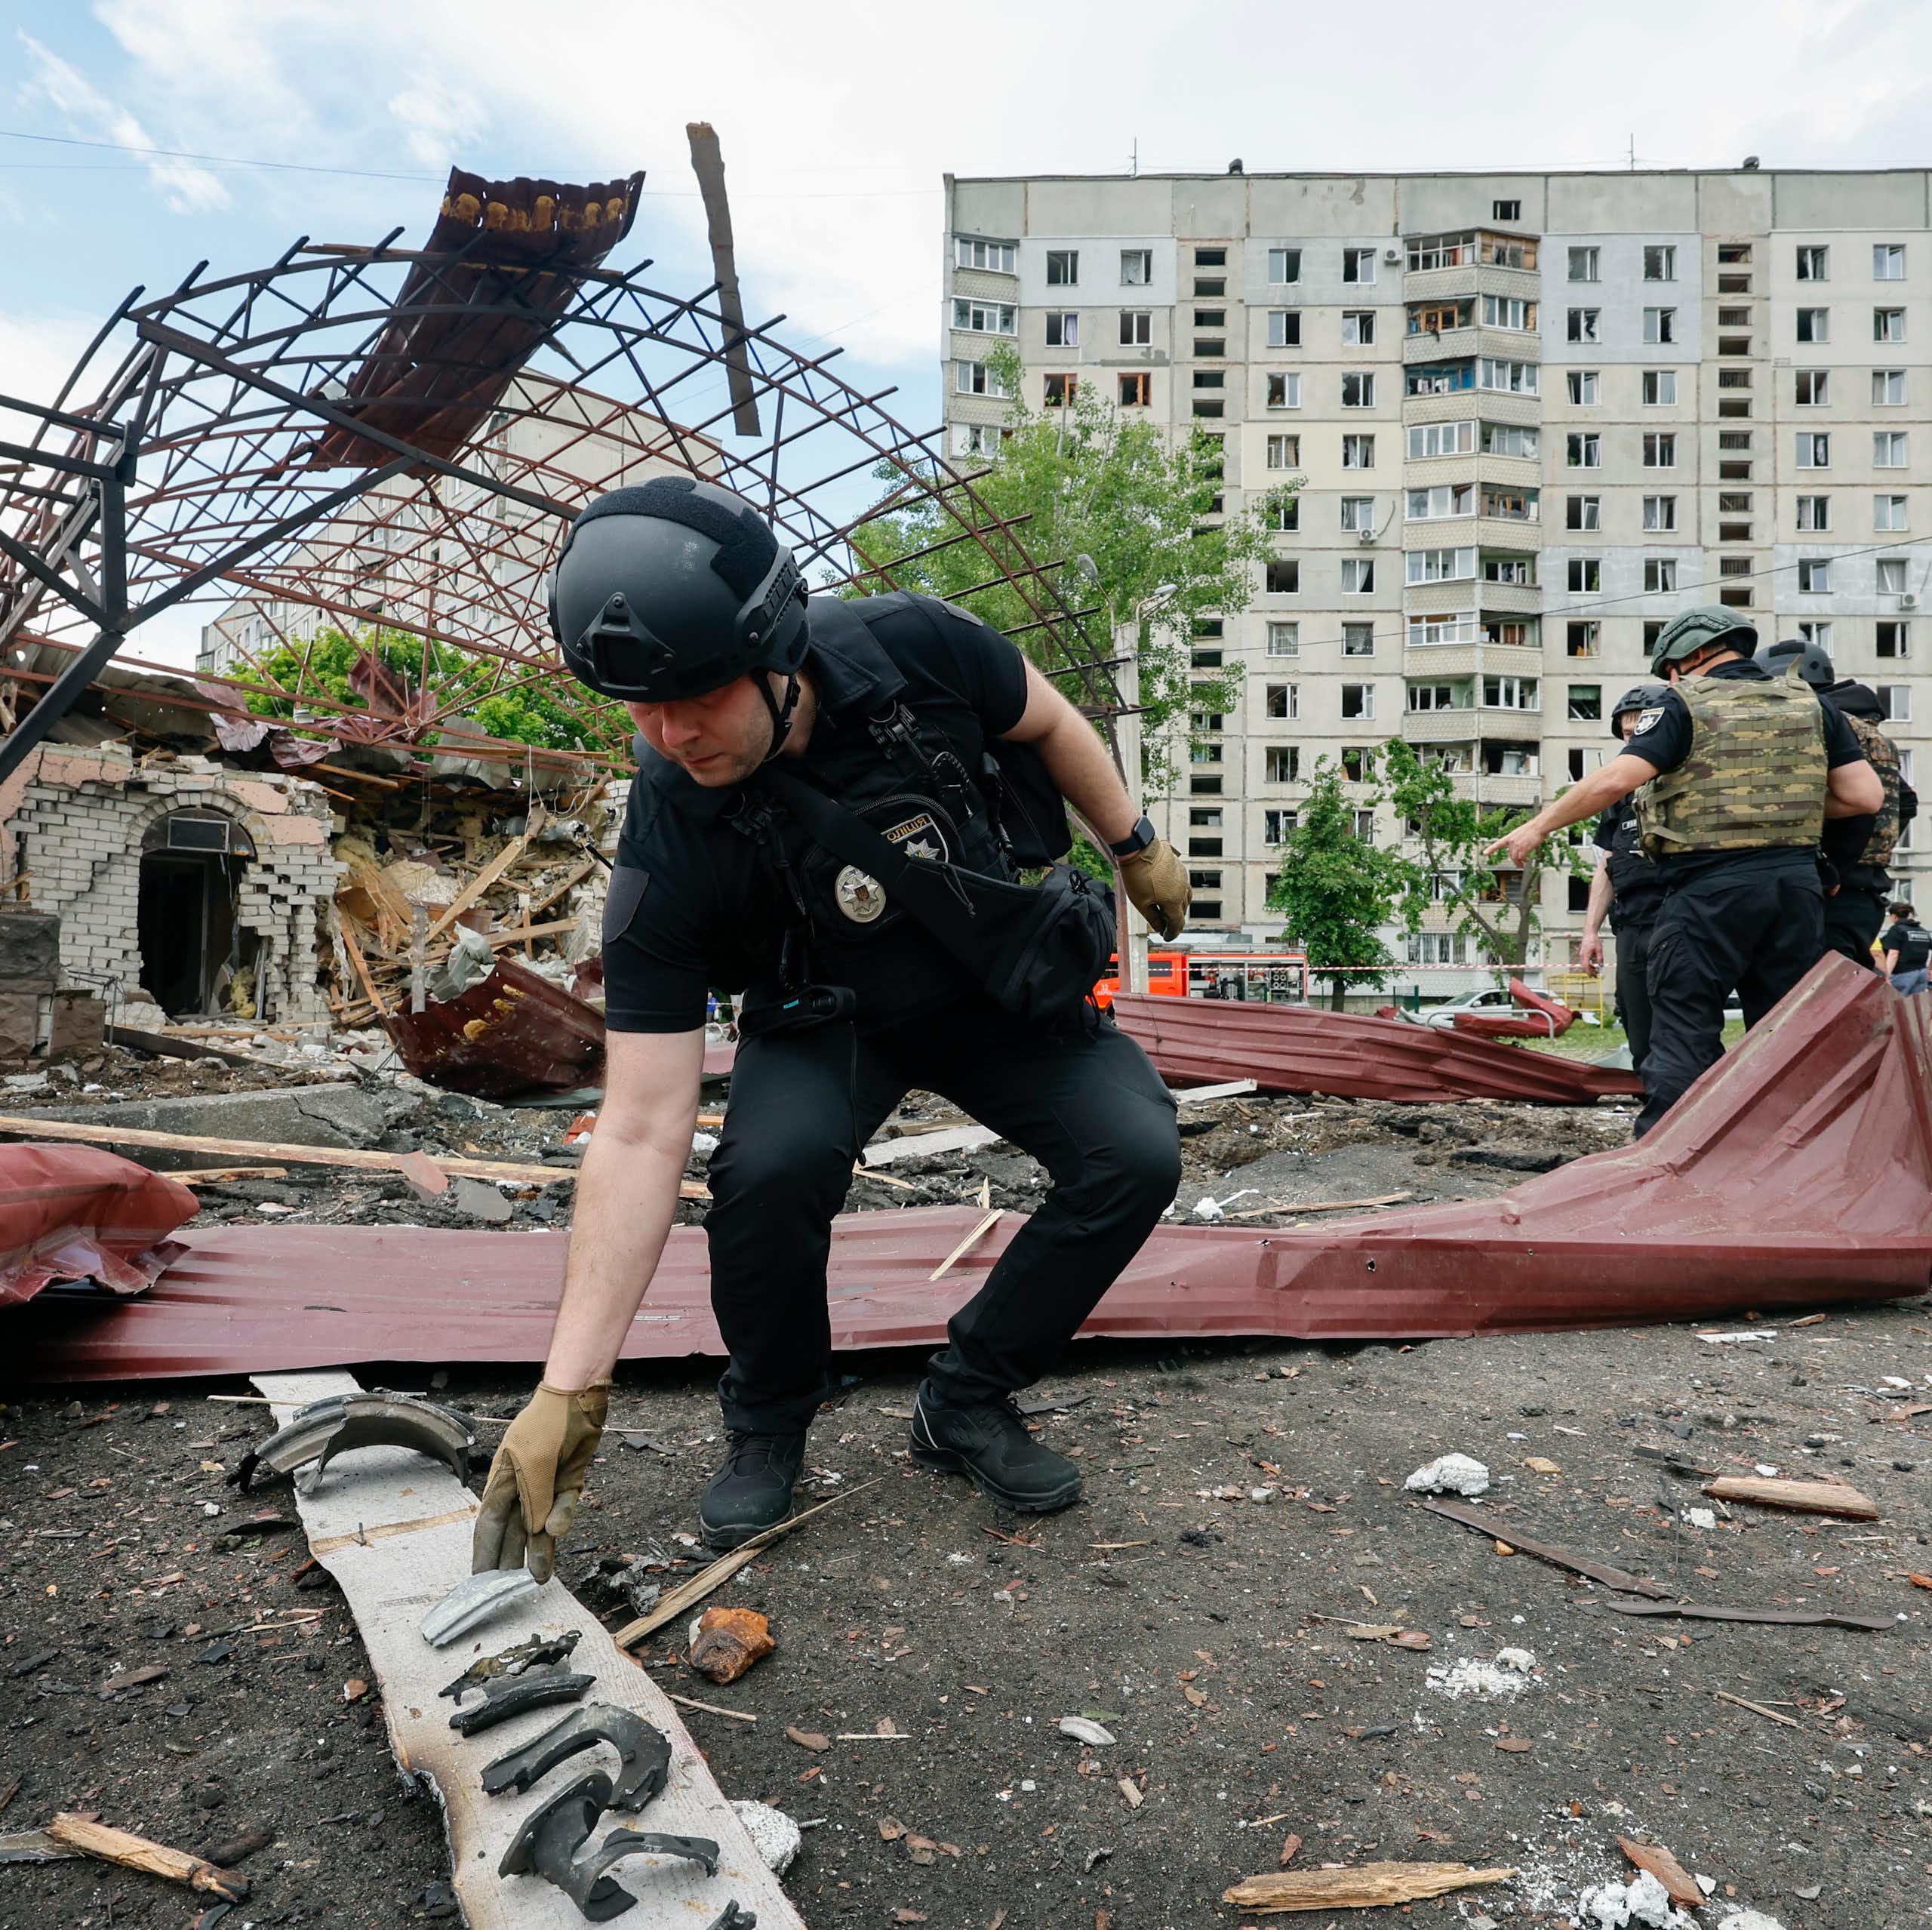 Ukrainian security forces examine the aftermath of a Russian airstrike in Kharkiv, northern Ukraine.